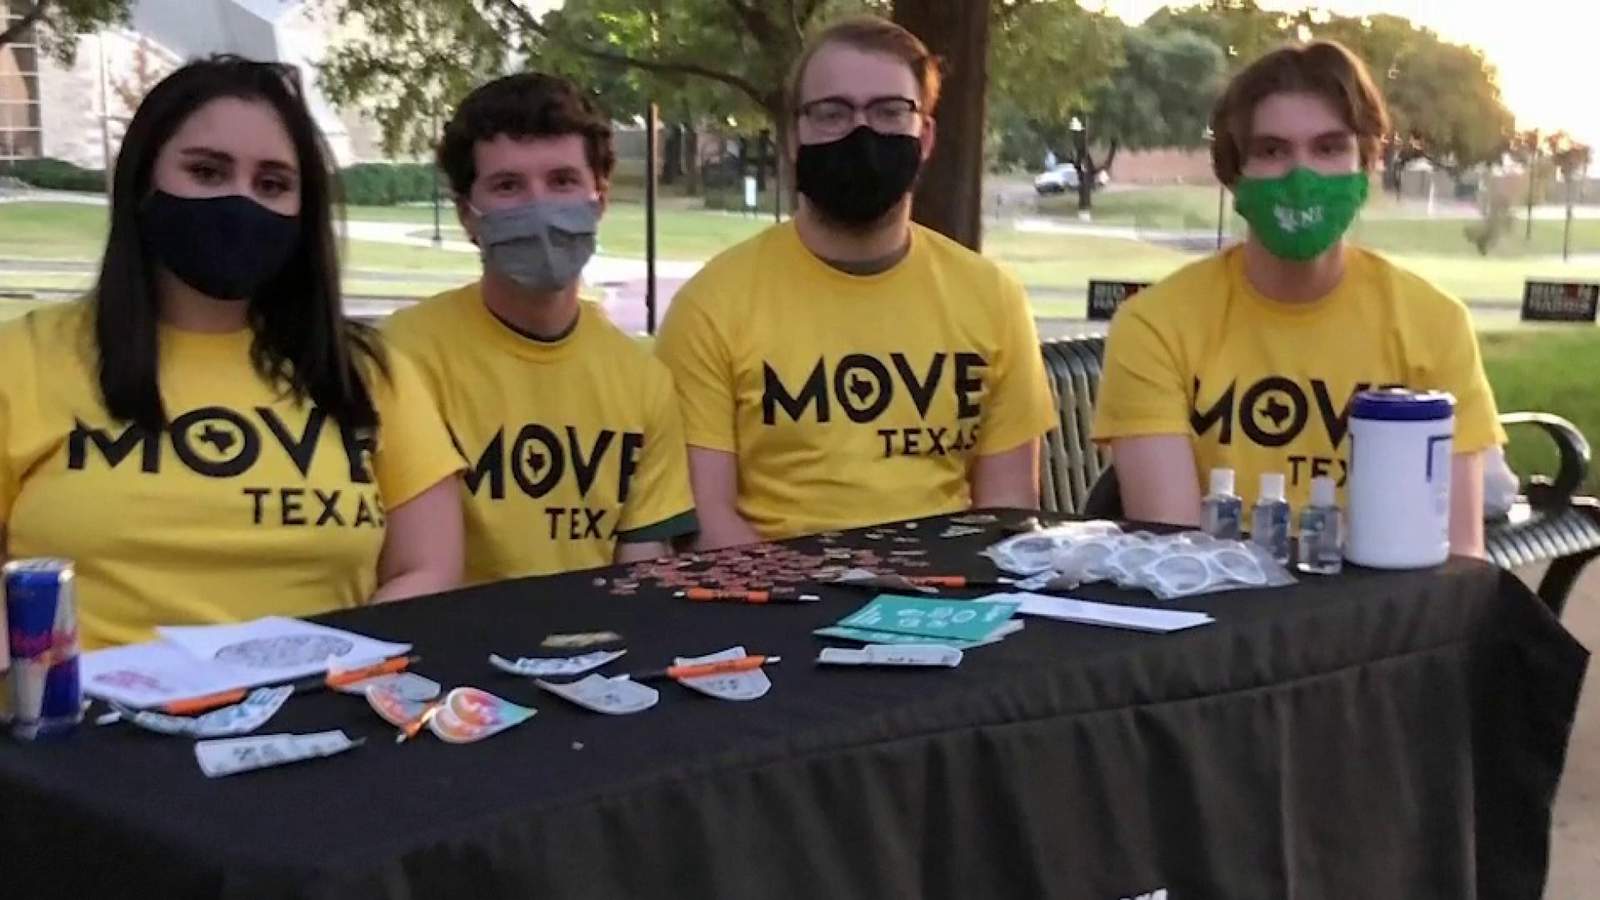 Spring will bring change of leadership at MOVE Texas